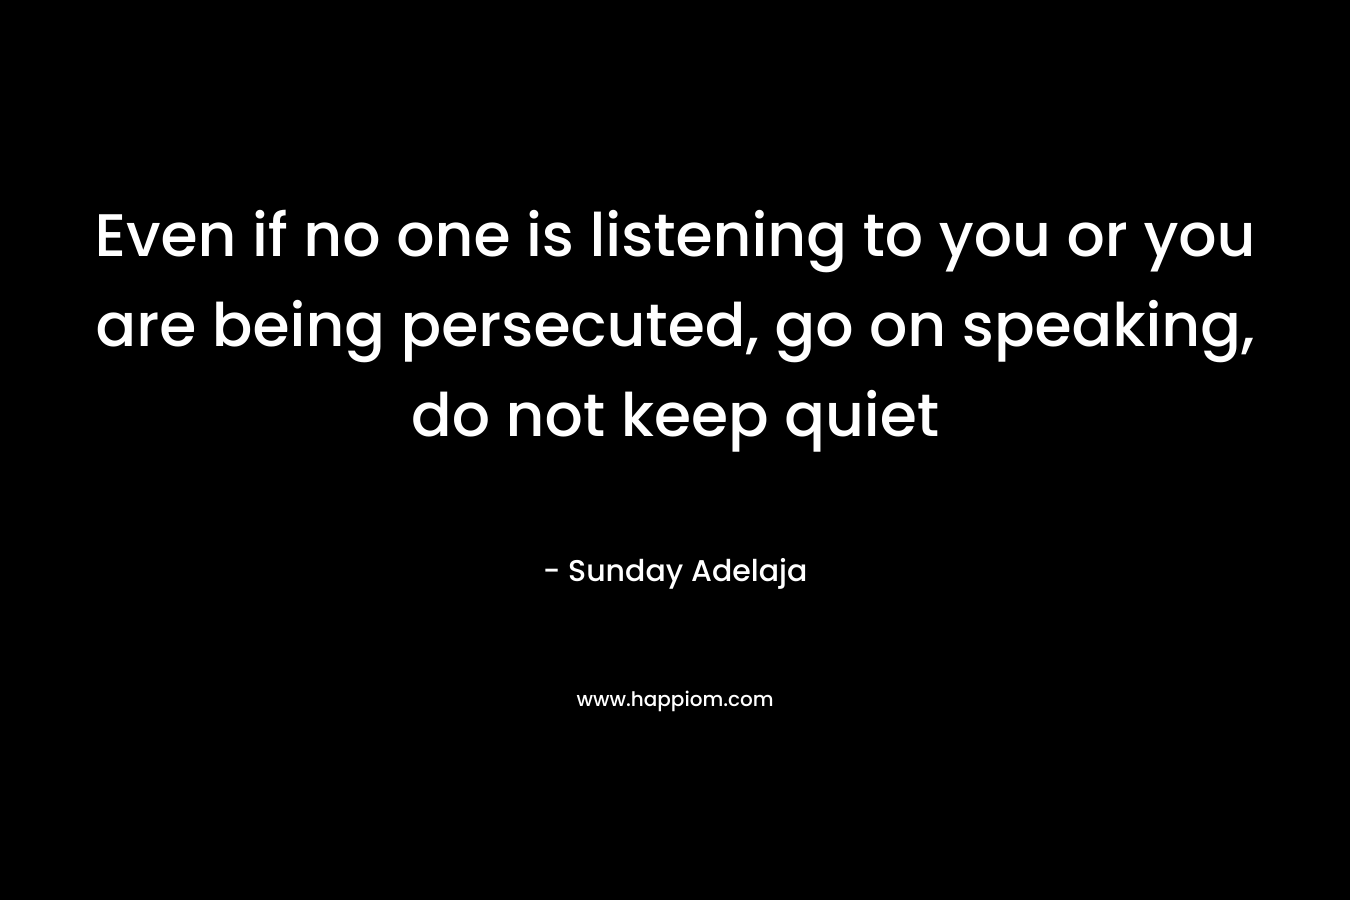 Even if no one is listening to you or you are being persecuted, go on speaking, do not keep quiet